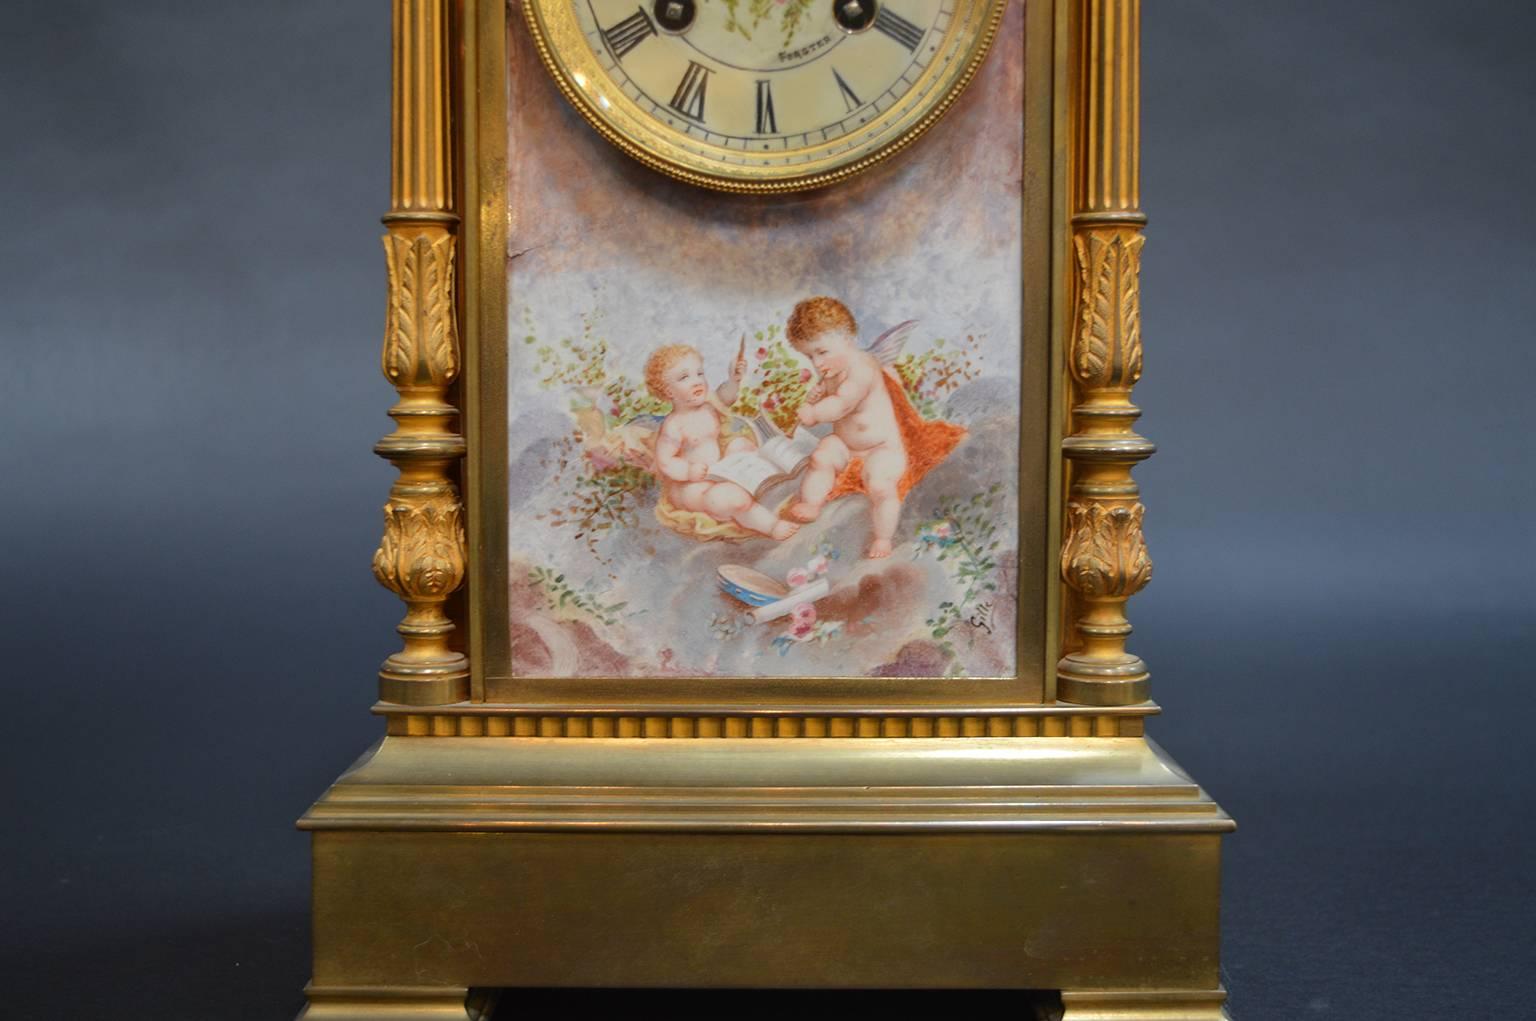 19th century French gilt bronze mantel clock. Japy Freres and Cie (maker). With inset Sevres style porcelain plaque. Painted dial signed Forster.